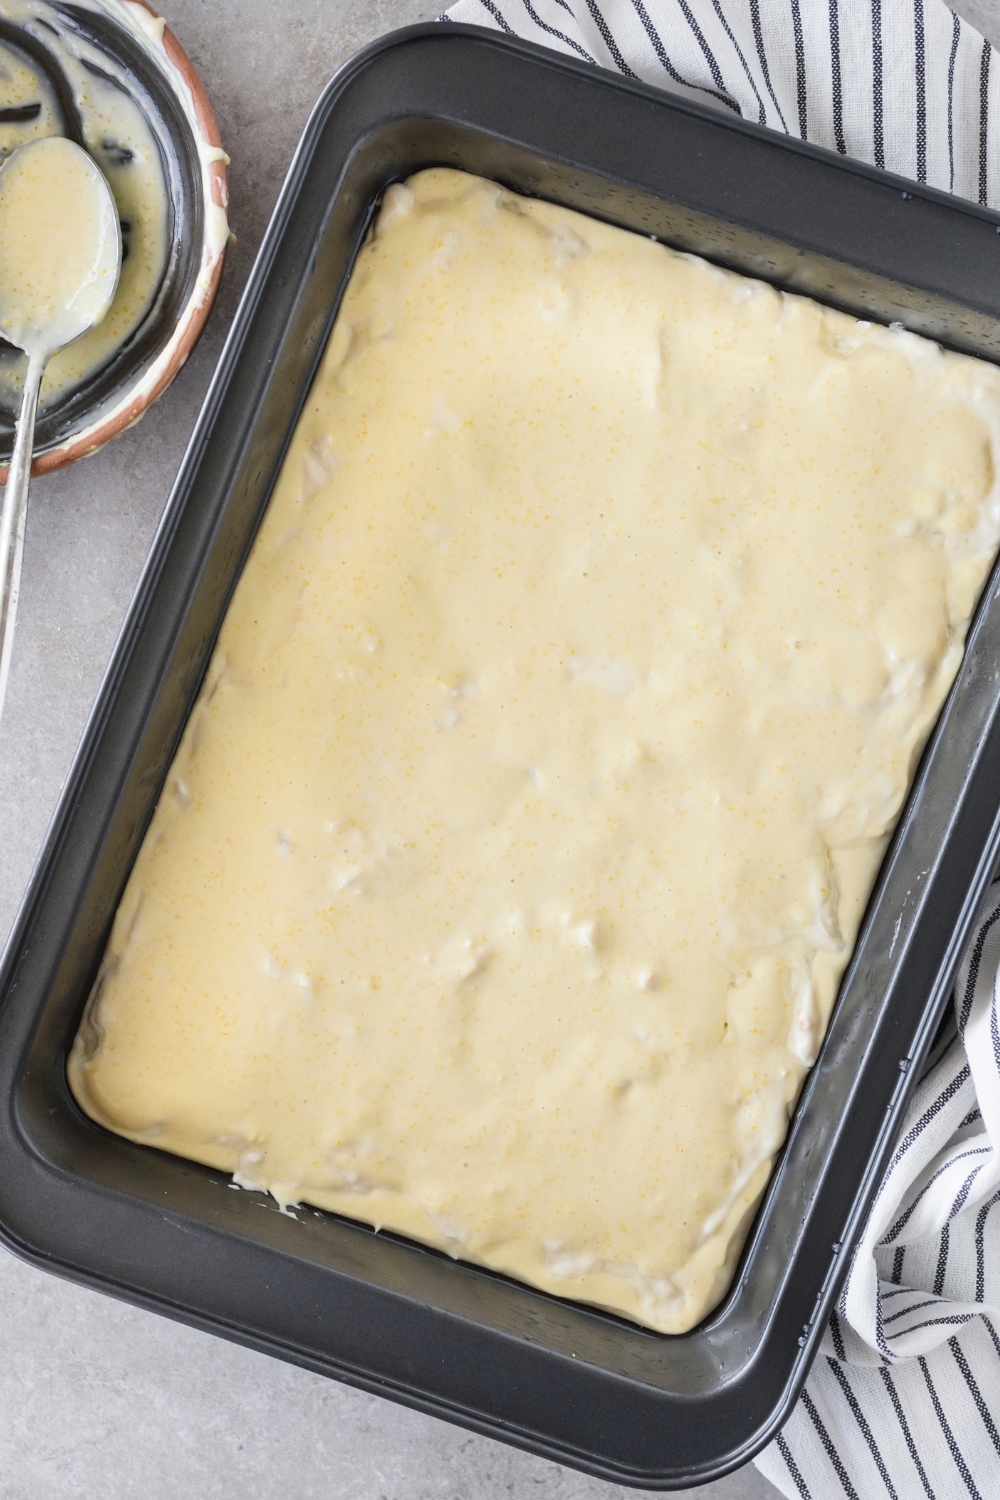 A baking dish filled with unbaked casserole.